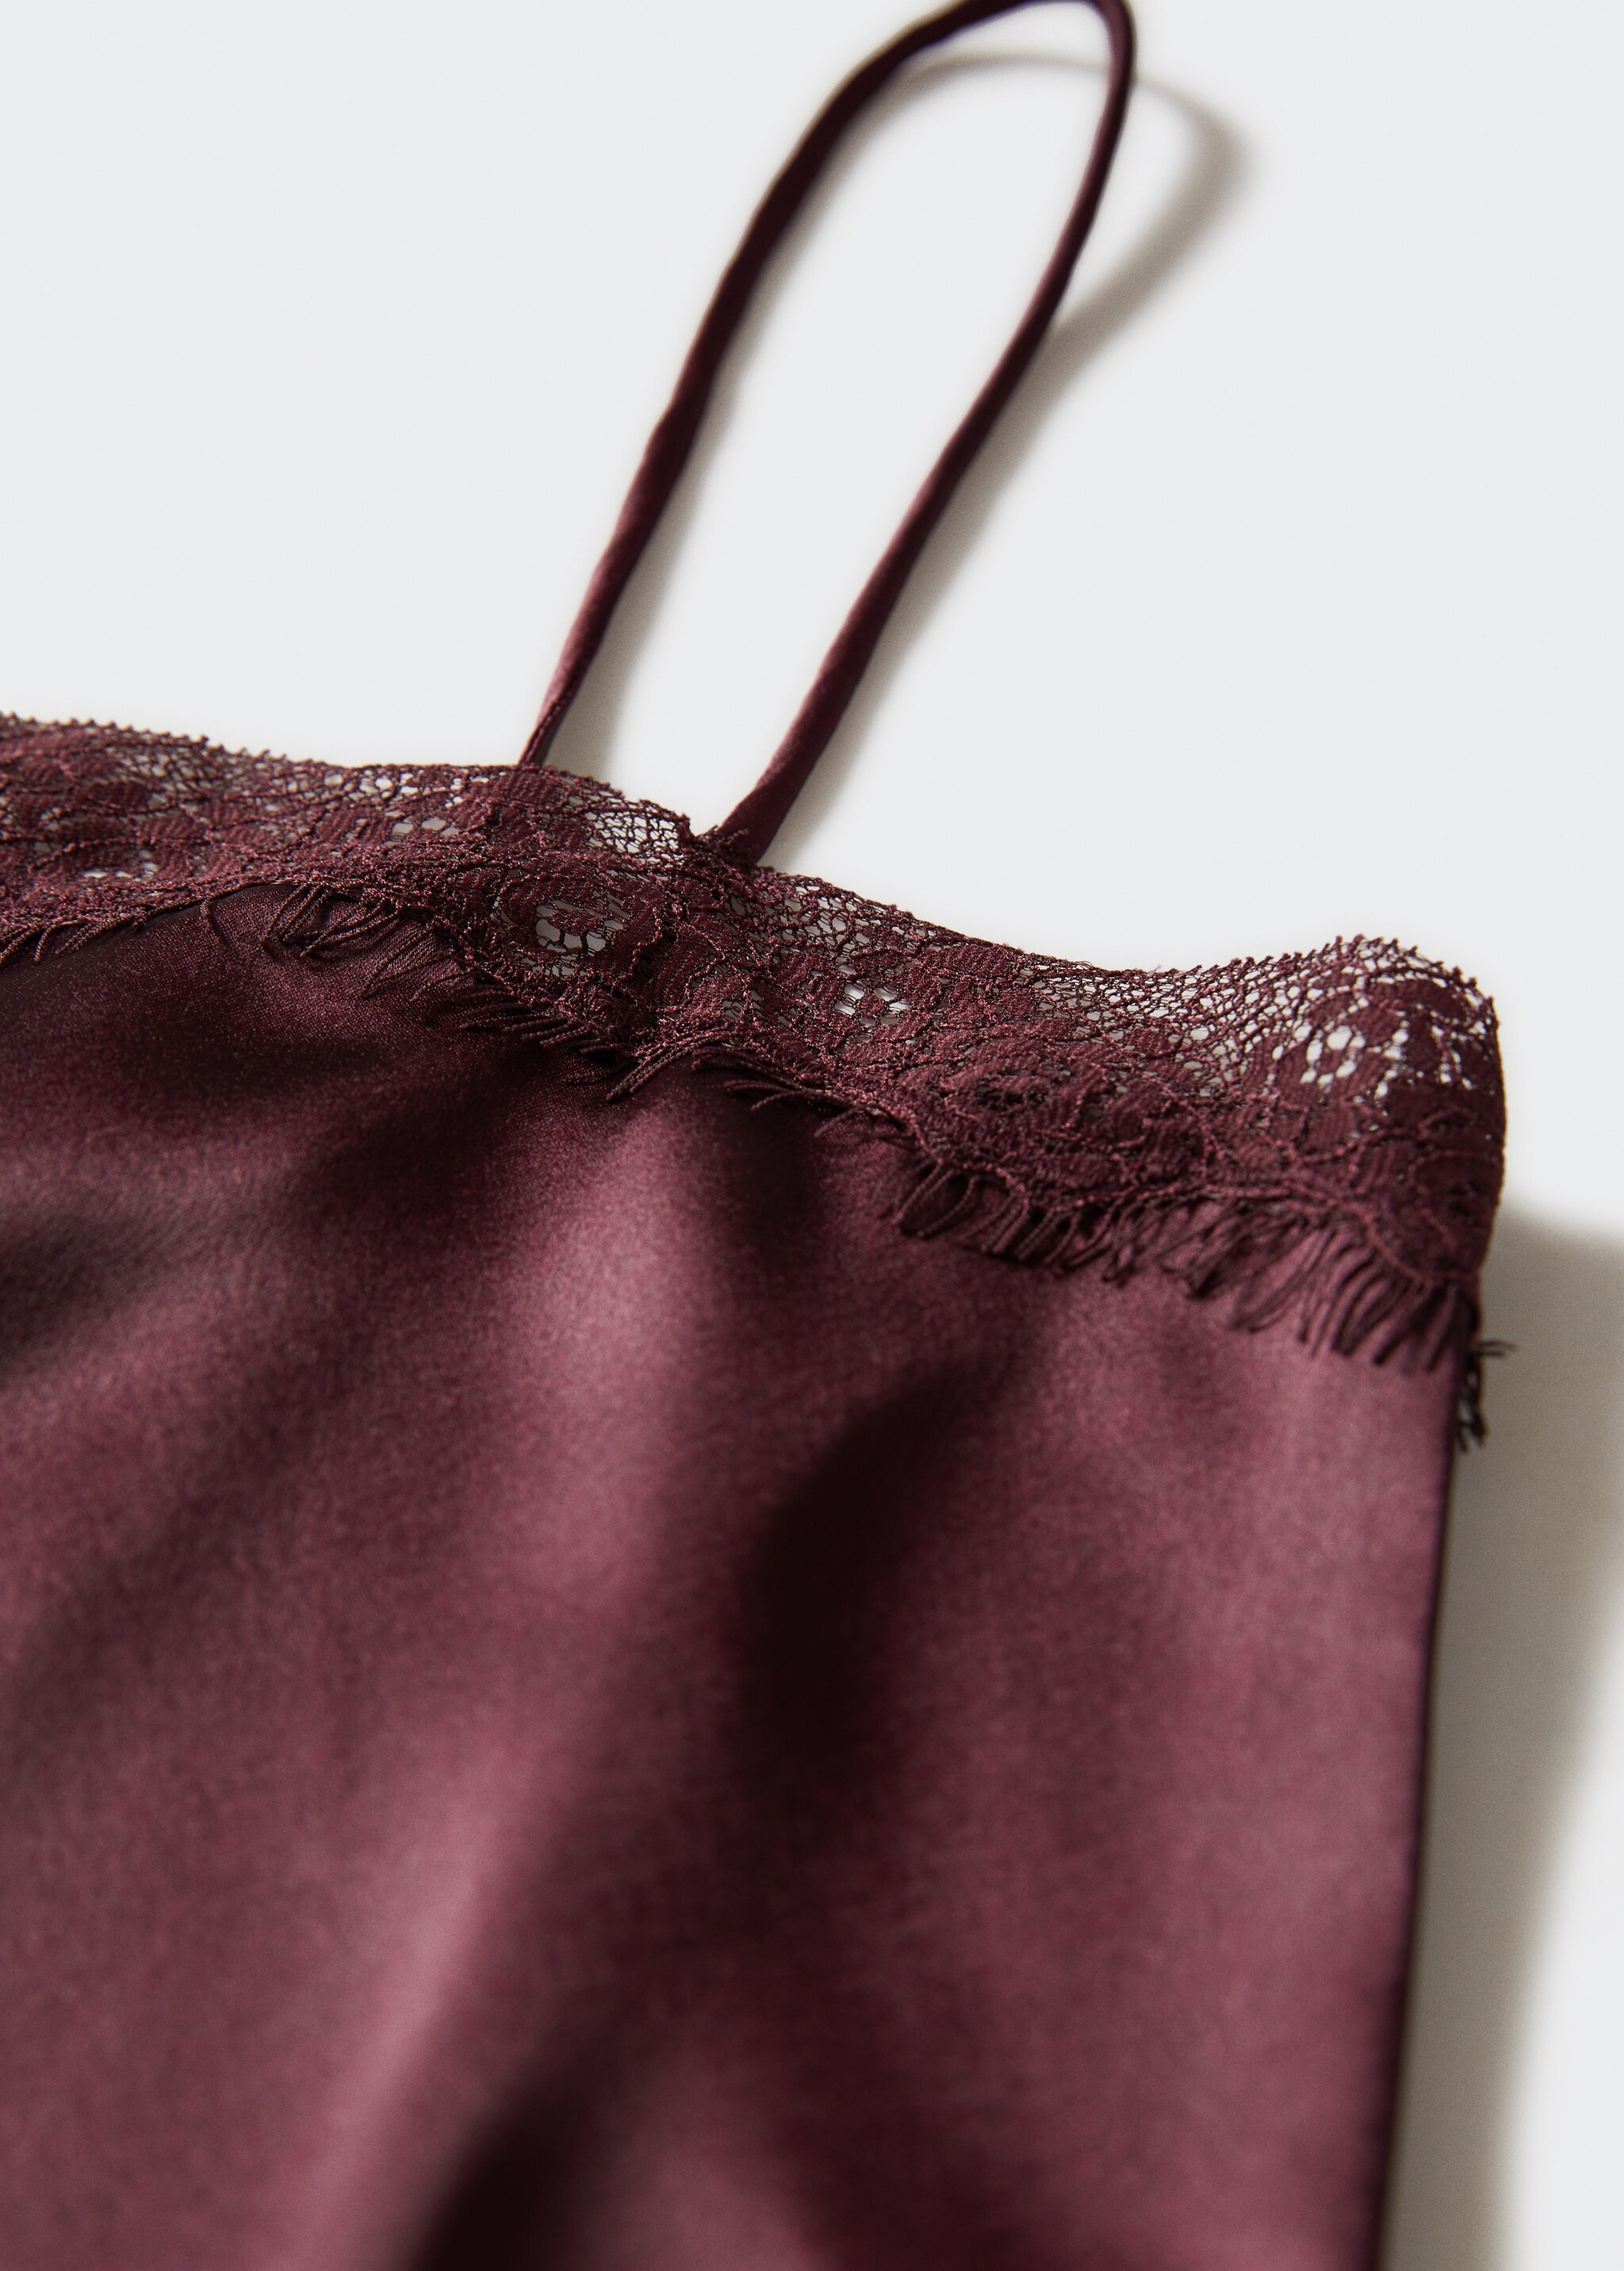 Satin lace nightgown - Details of the article 8